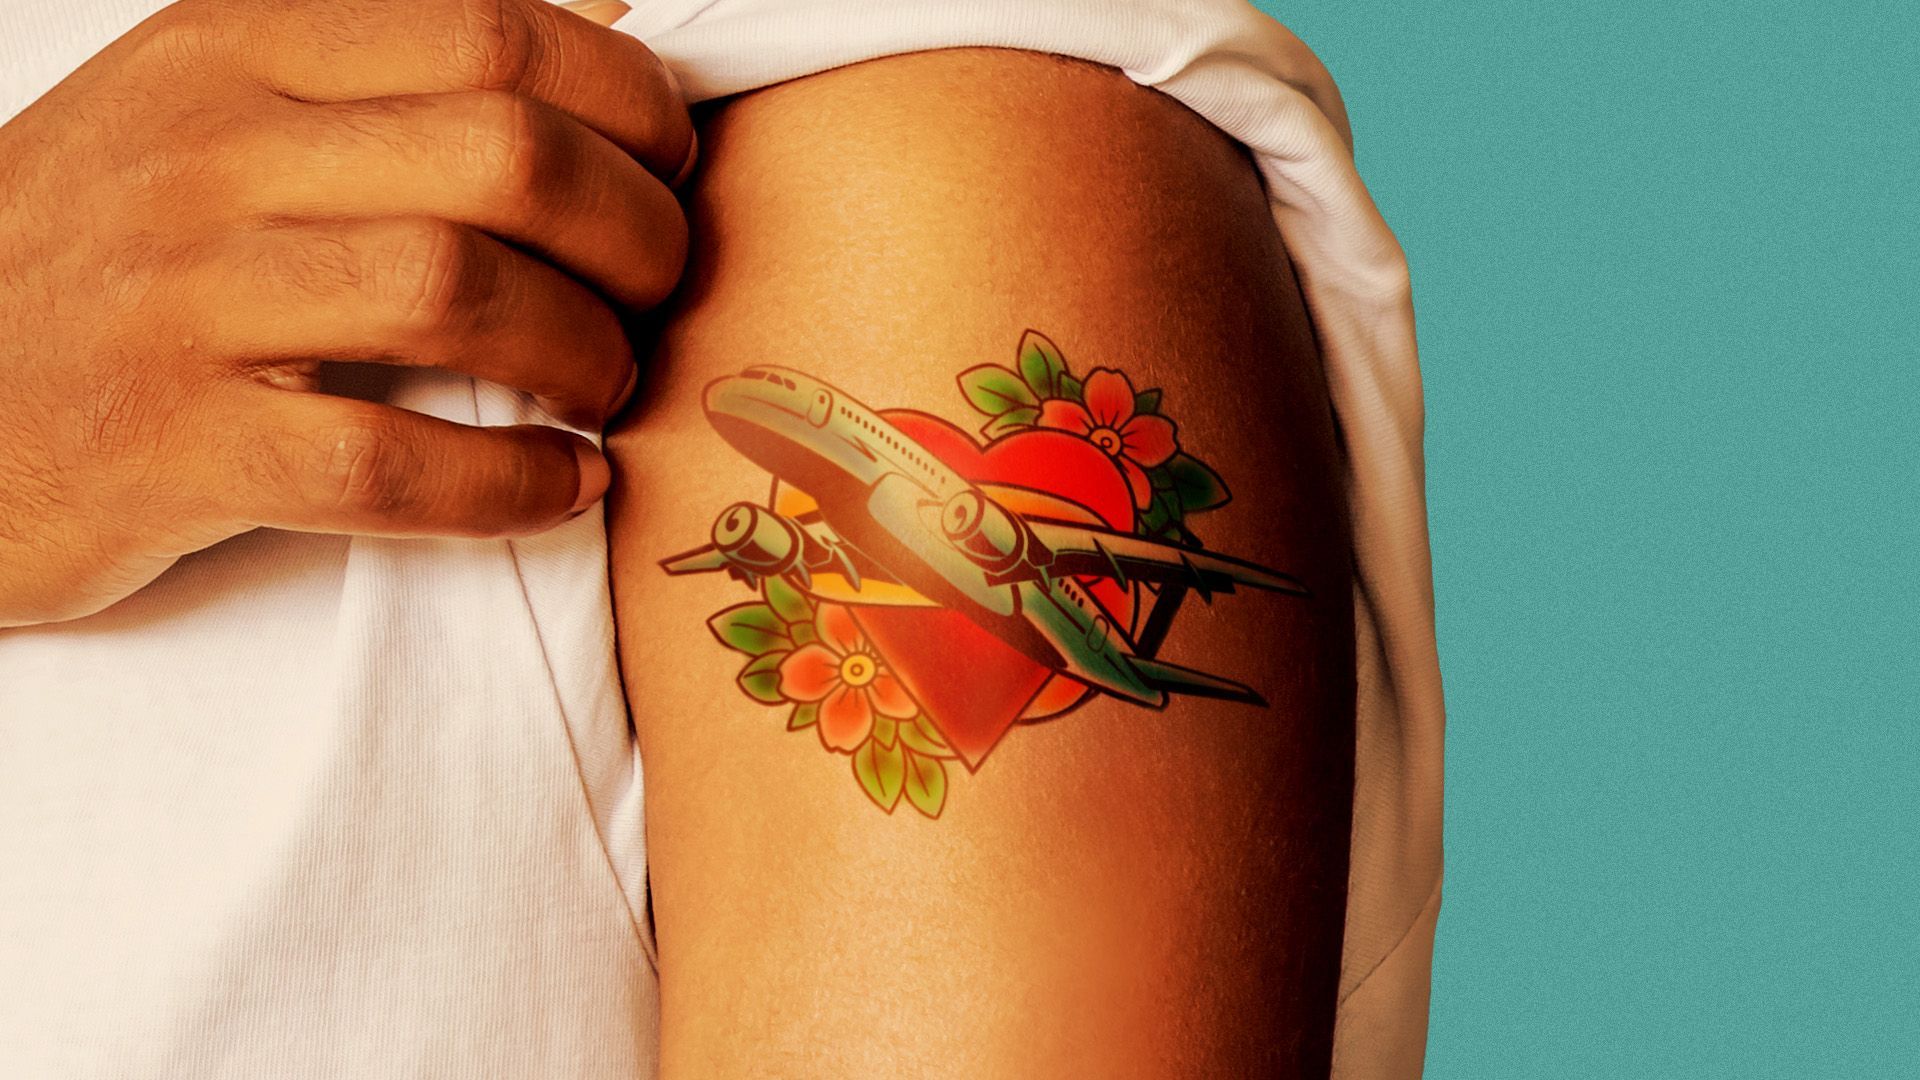 Illustration of a tattoo featuring an airplane, heart, and flowers